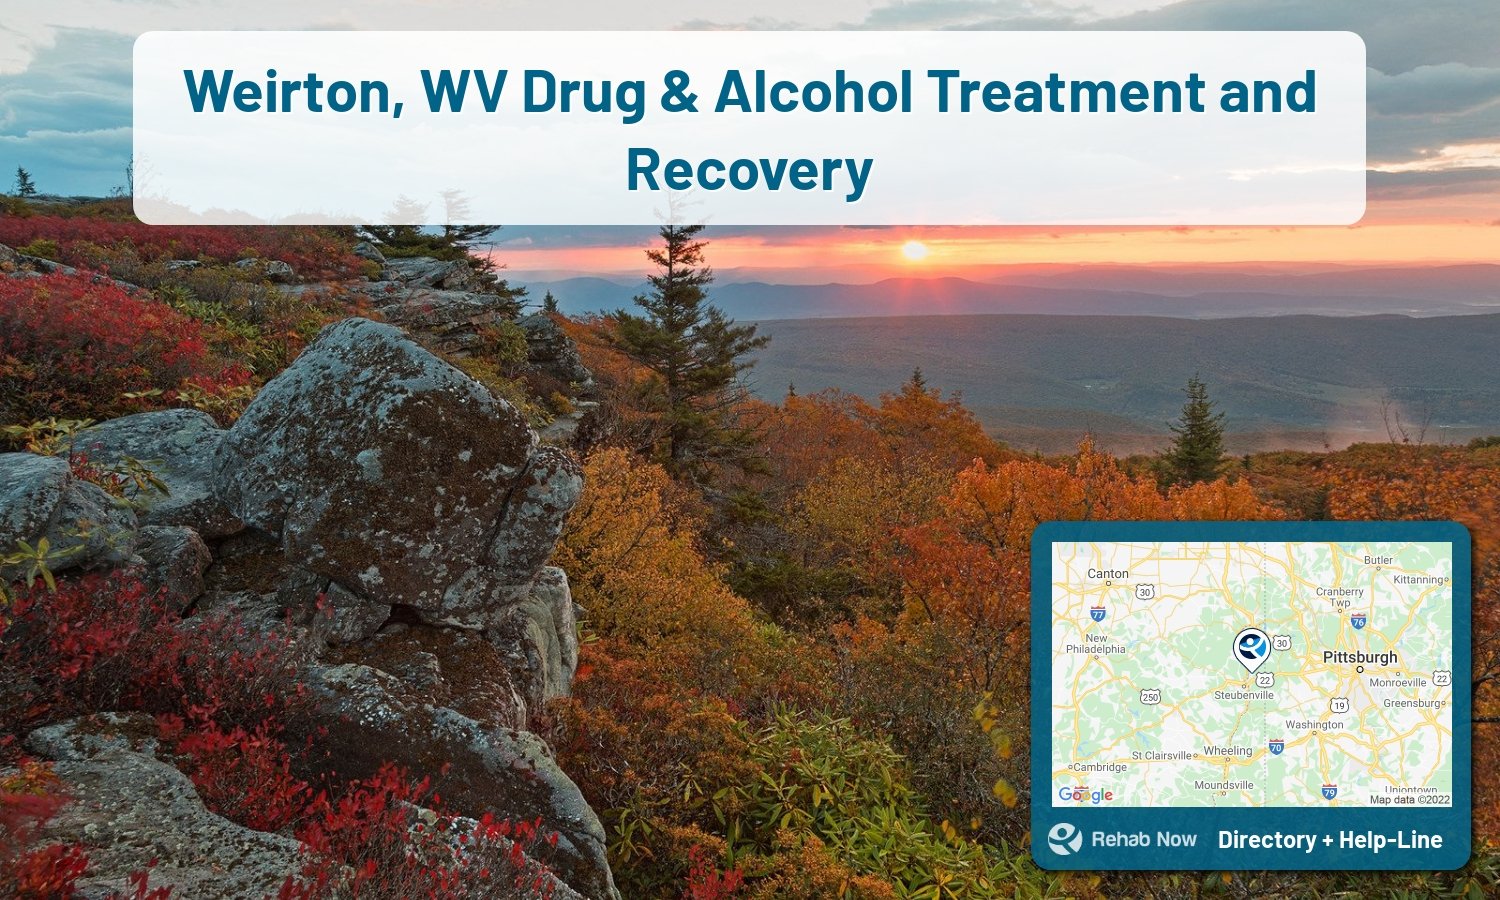 Ready to pick a rehab center in Weirton? Get off alcohol, opiates, and other drugs, by selecting top drug rehab centers in West Virginia